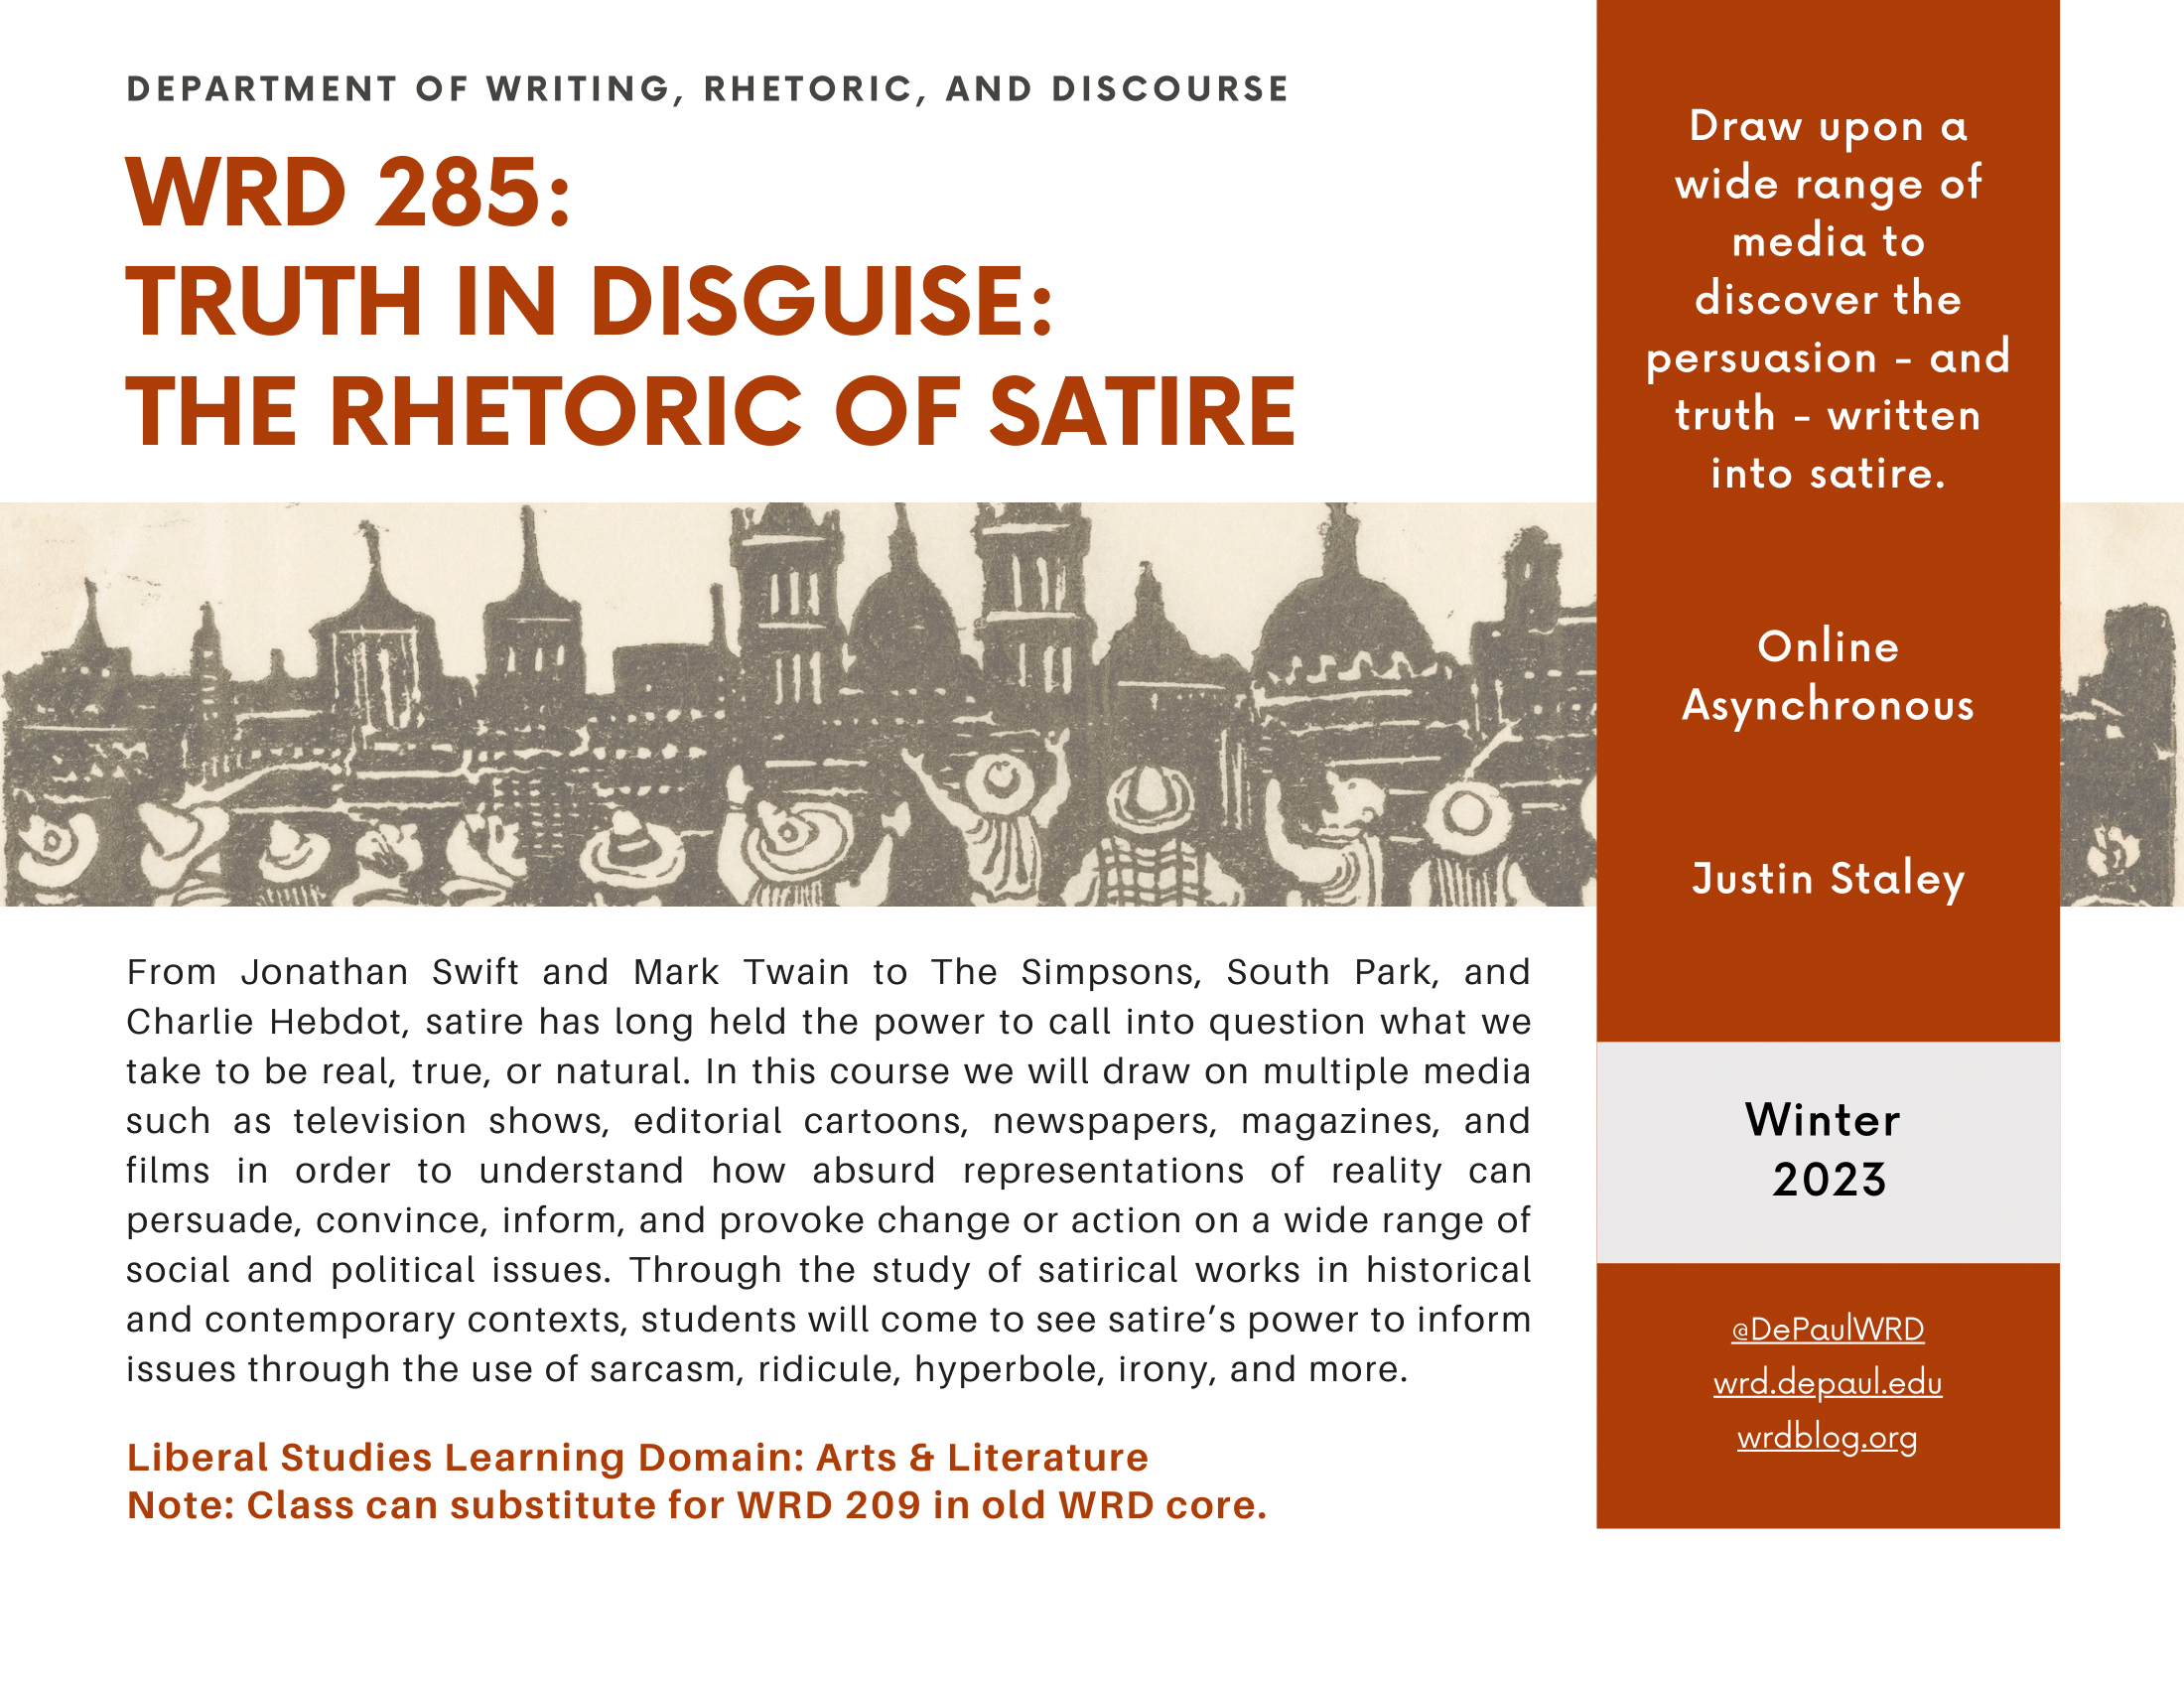 WRD 285: TRUTH IN DISGUISE: THE RHETORIC OF SATIRE